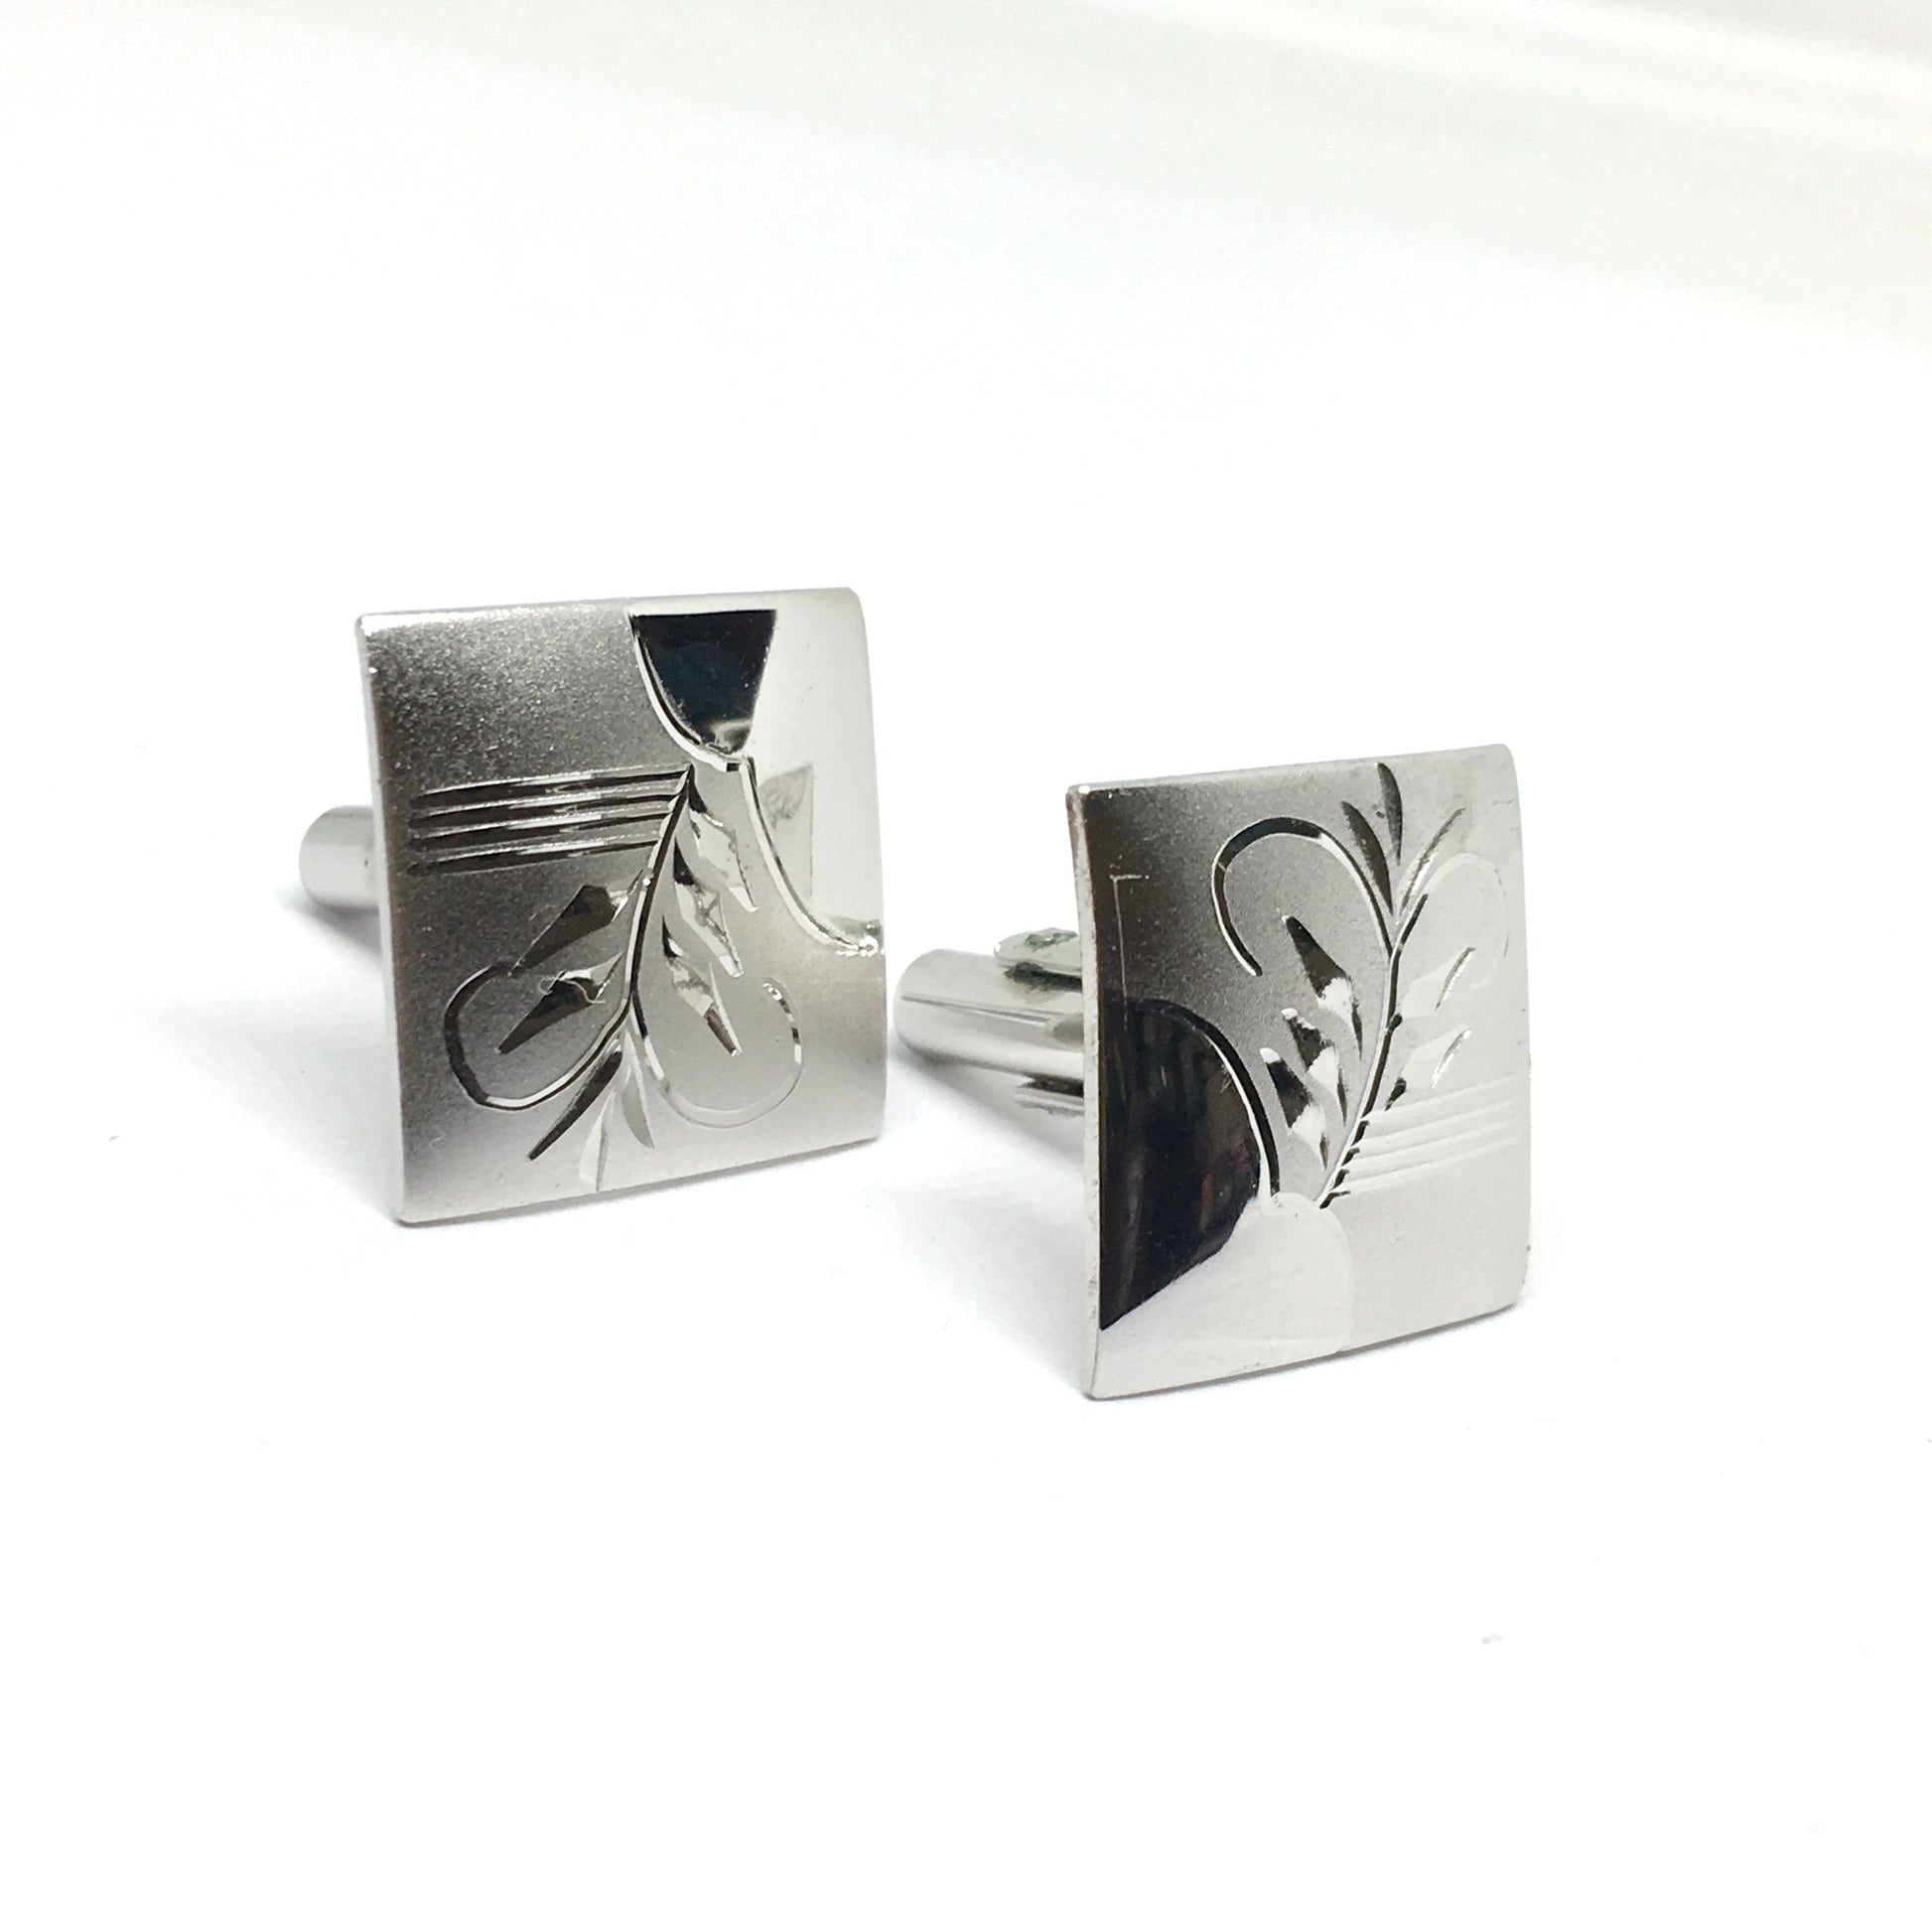 Cufflinks | Mens Used Sterling Silver Ocean Side Design Etched Square Toggle Cuff-links  | Blingschlingers.com  USA